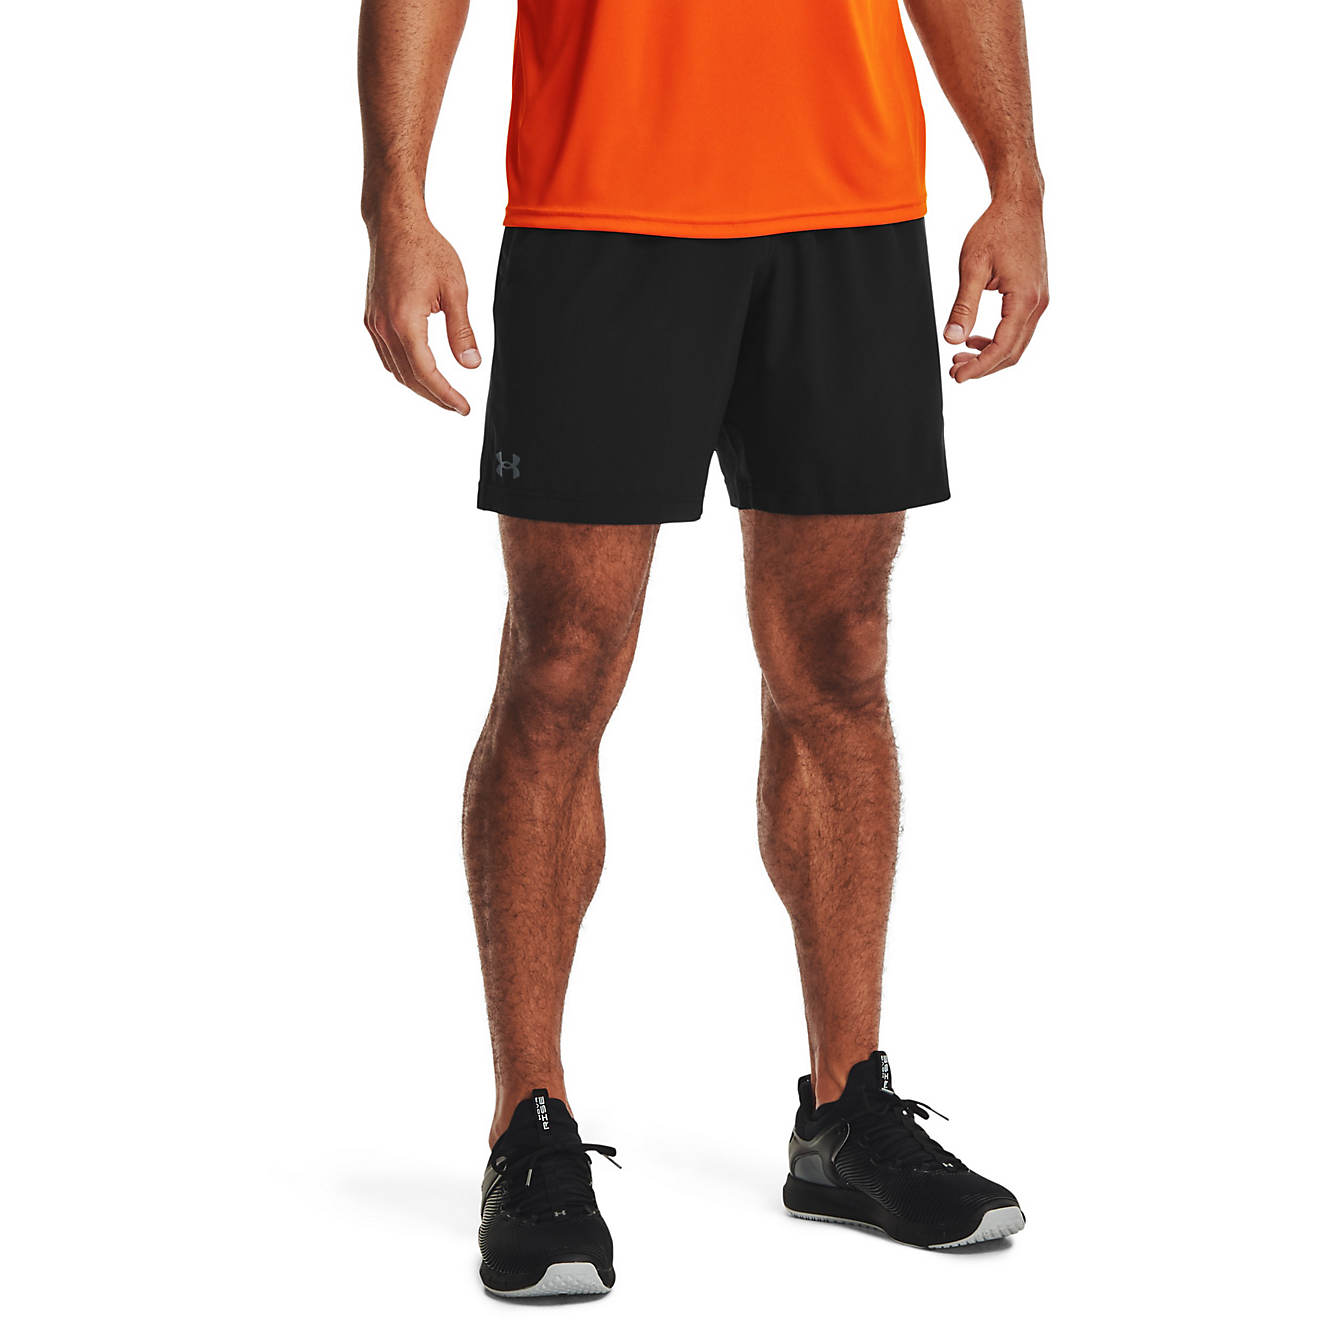 Under Armour Men's Woven Shorts 7 in